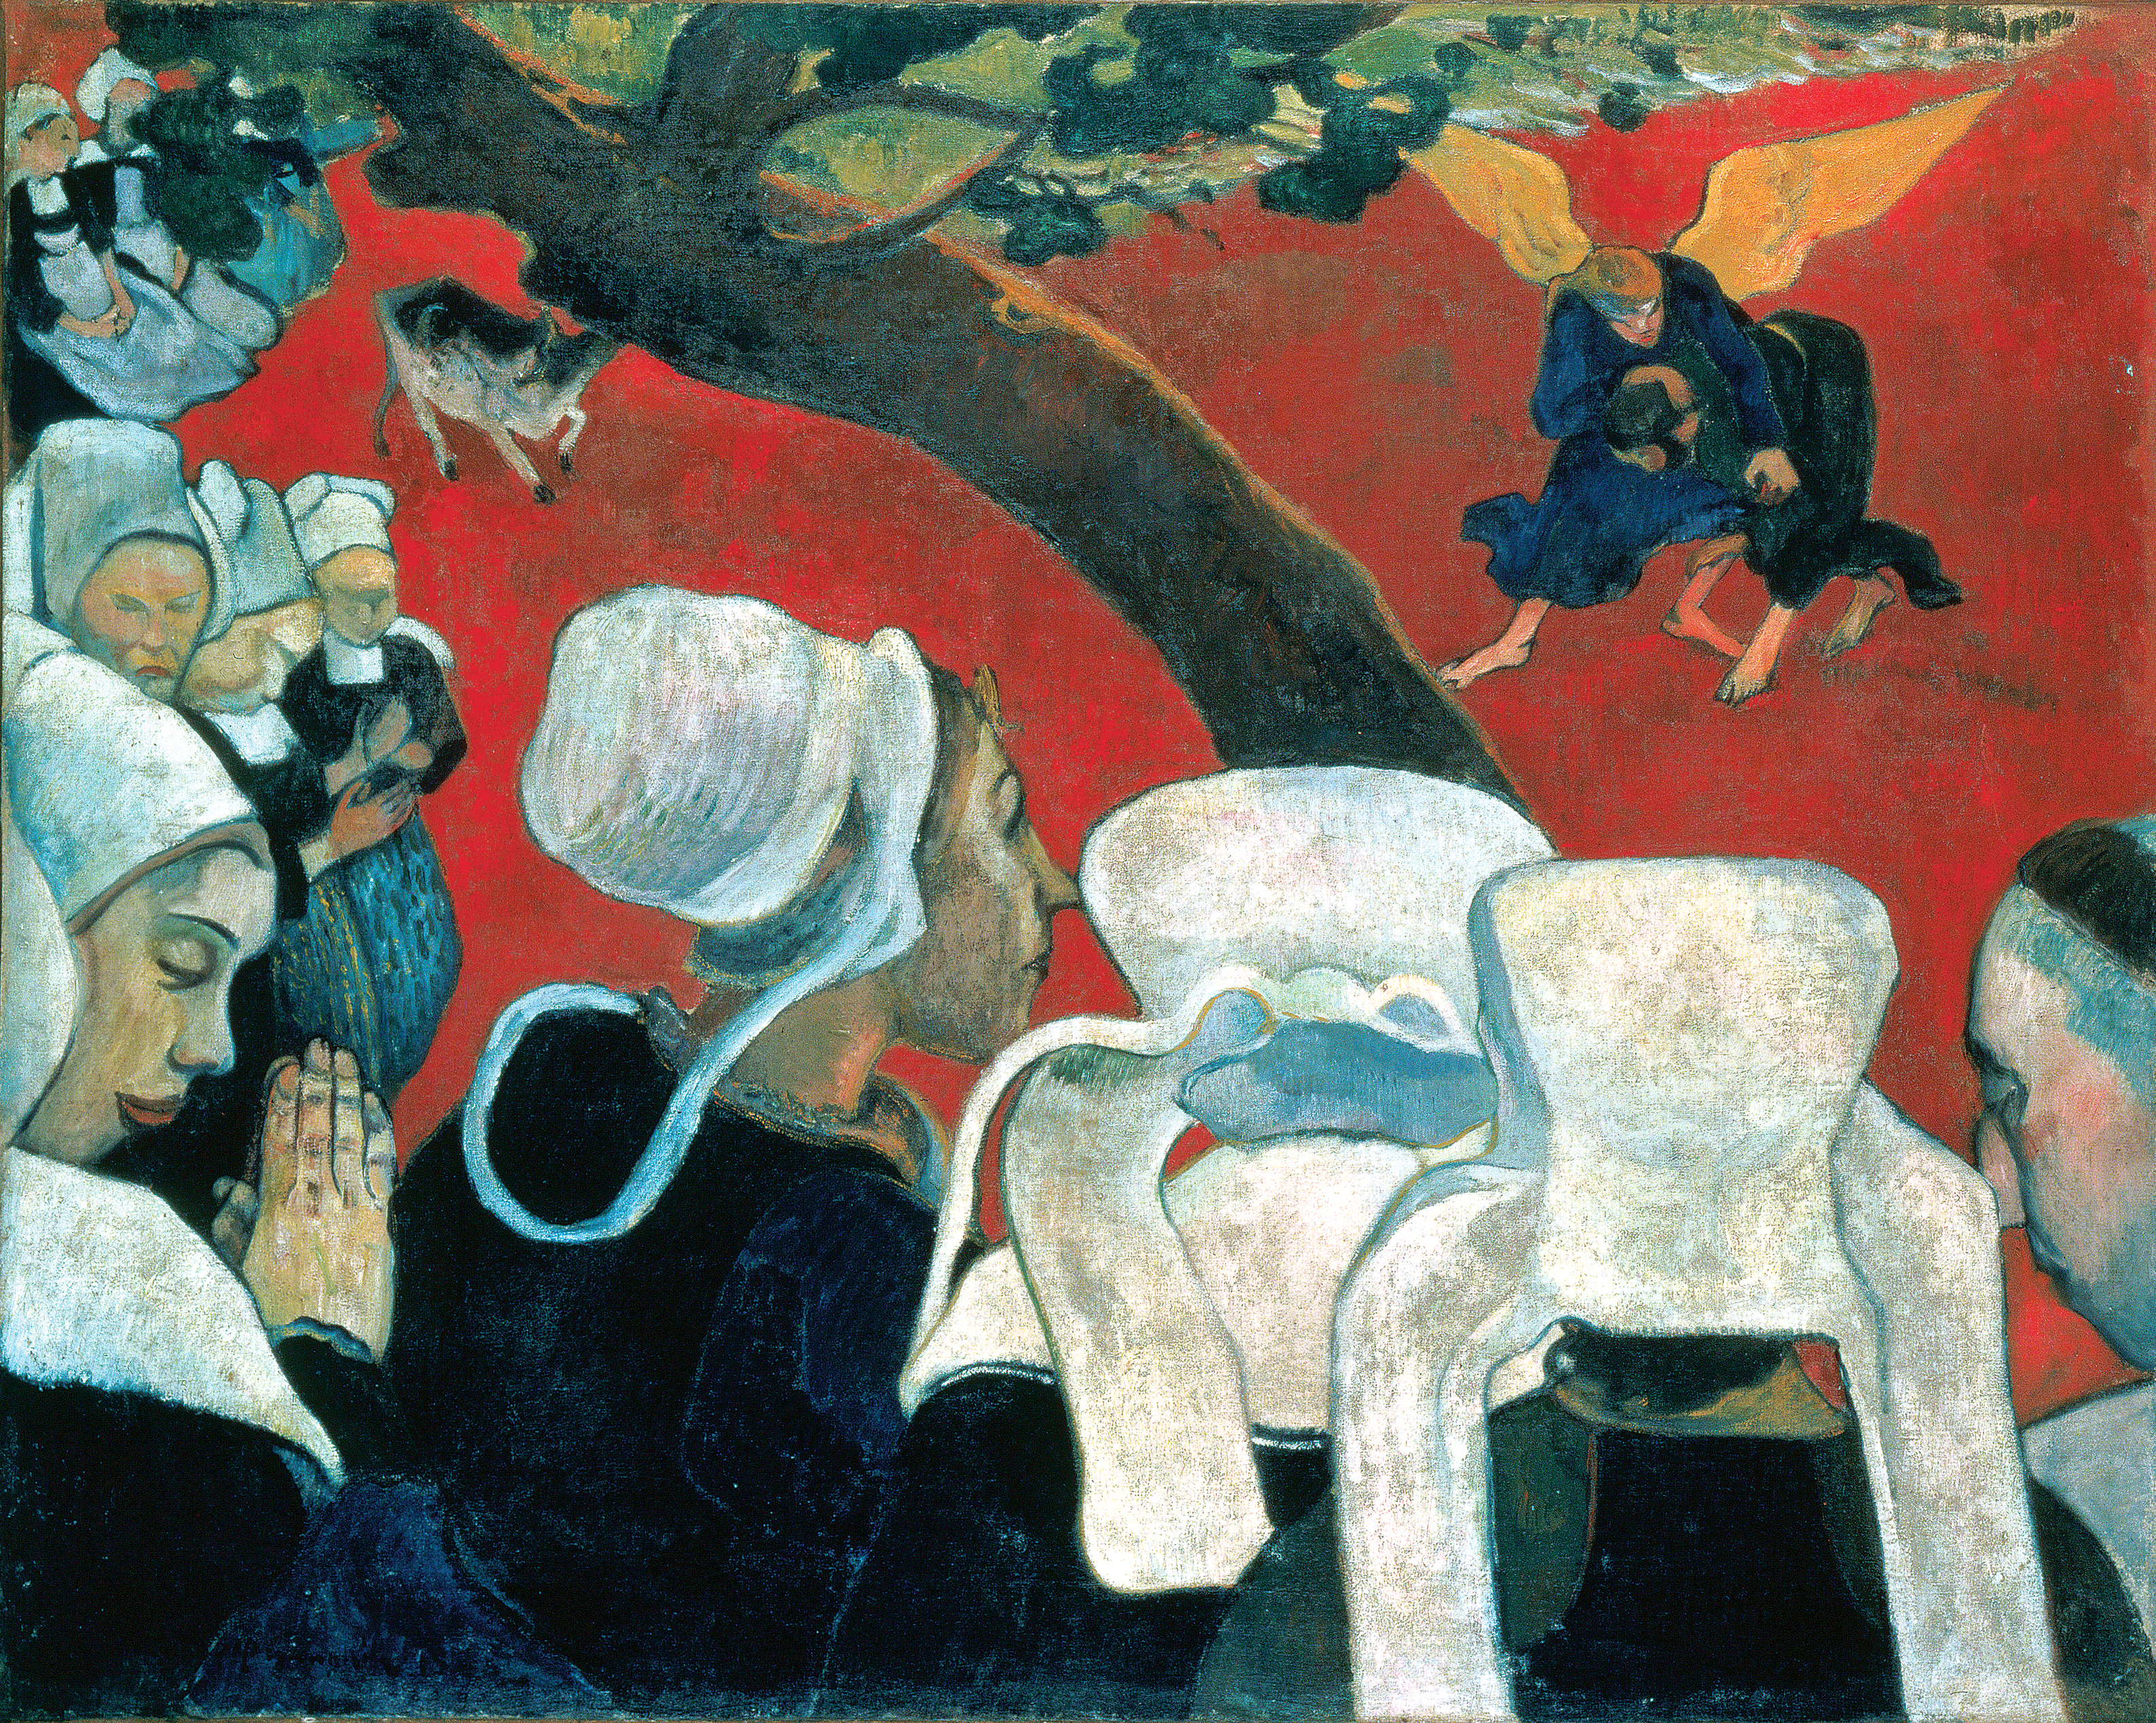 Paul Gauguin, Vision after the Sermon (or Jacob Wrestling with the Angel), 1888, oil on canvas, 72.20 x 91.00 cm (National Gallery of Scotland, Edinburgh)